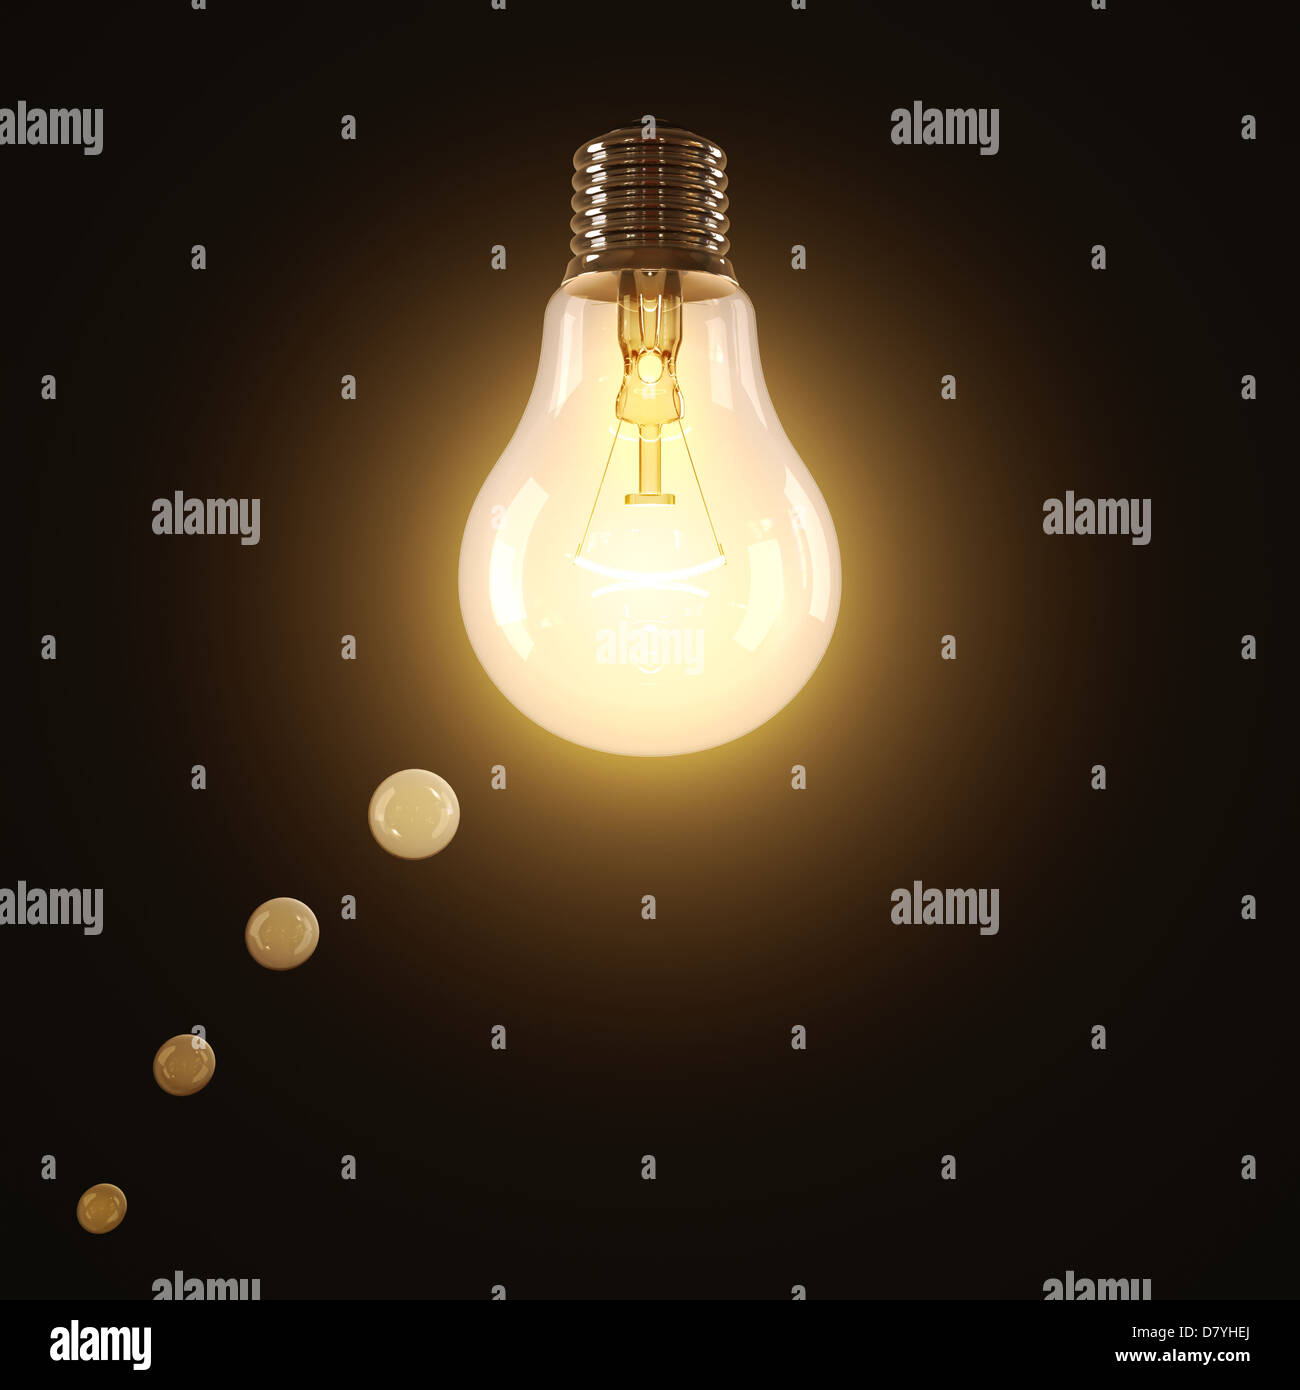 Incandescent lamp lit shaped in a think balloon. Stock Photo